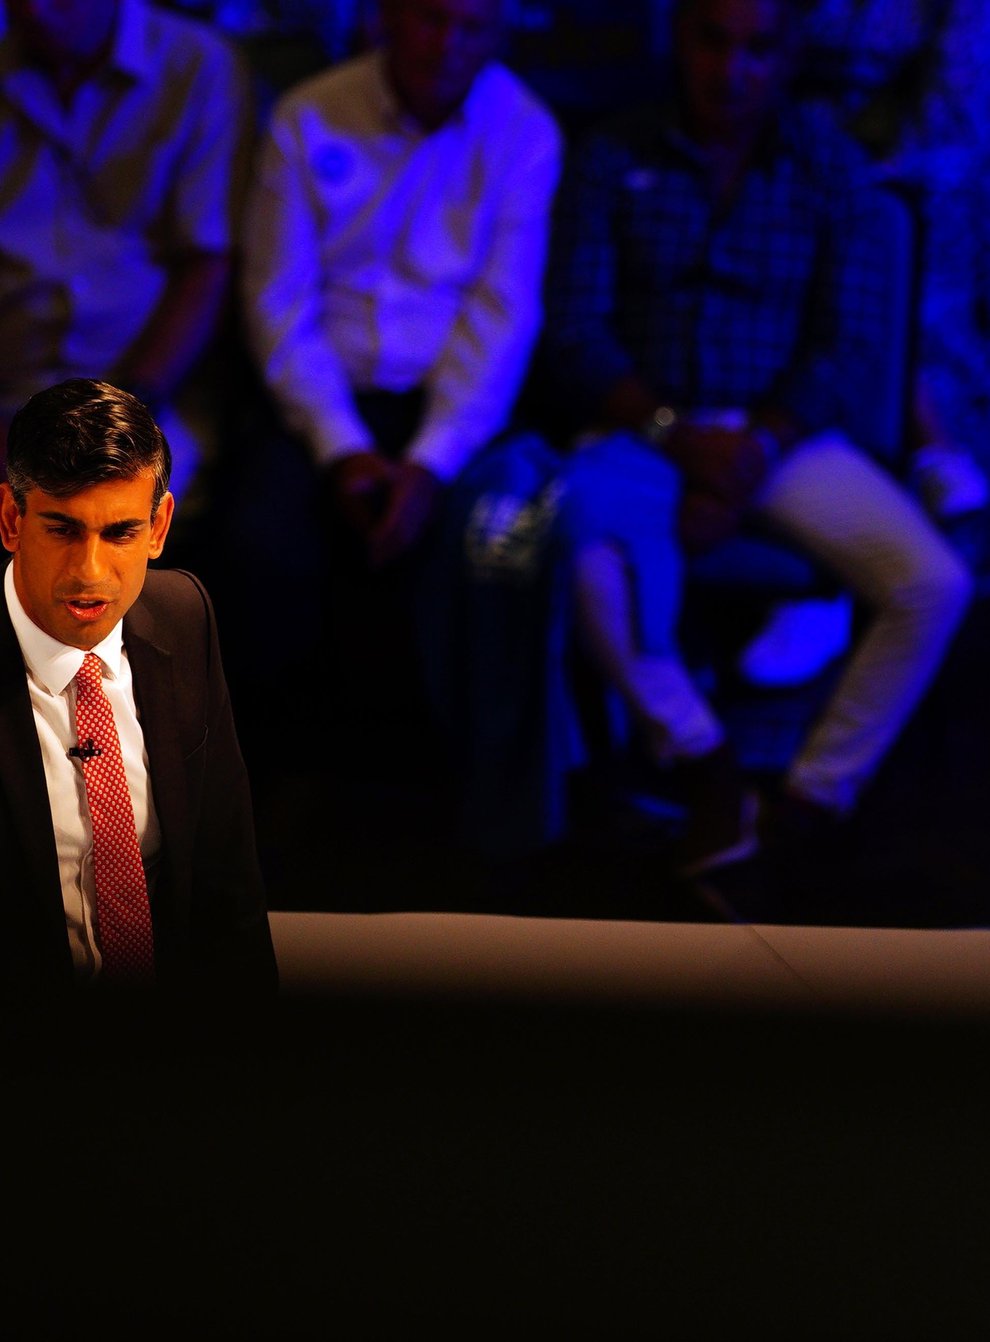 Rishi Sunak’s tax-cutting pledge is a ‘fantasy’, Liz Truss supporter Jacob Rees-Mogg said as the two Conservative Party leadership campaigns clashed (Ben Birchall/PA)